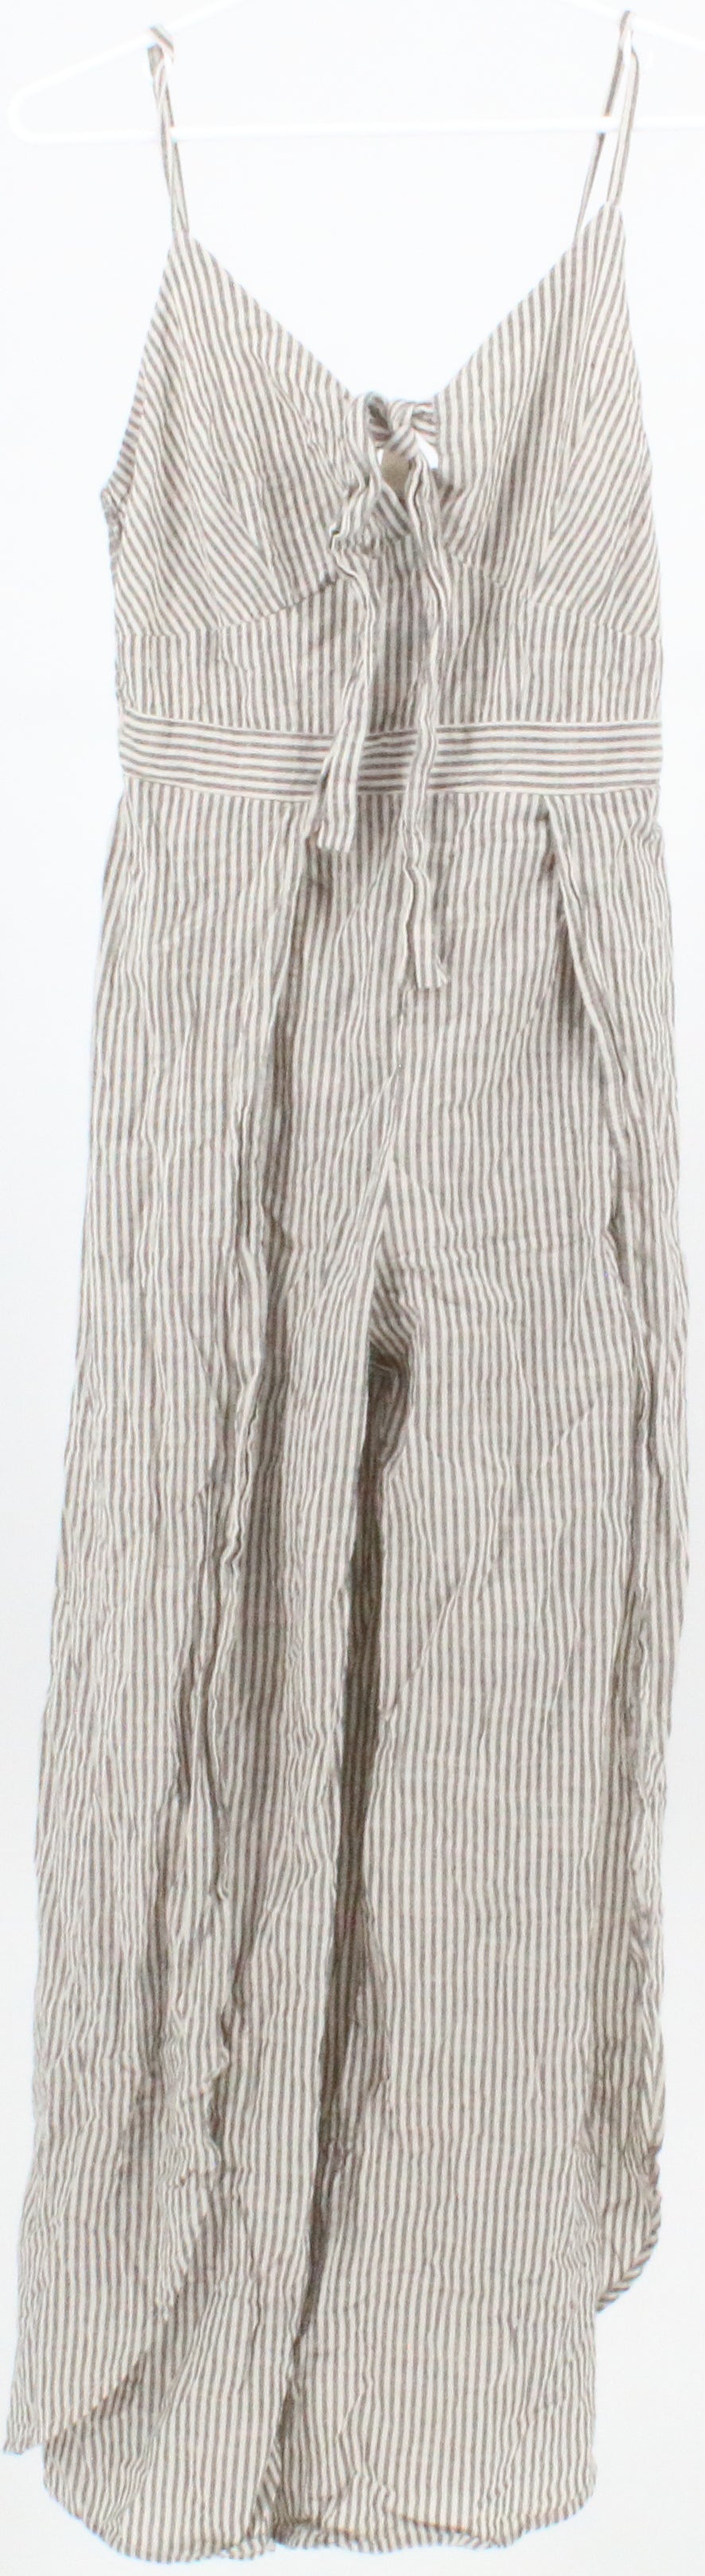 Japna Off White and Grey Striped Jumpsuit